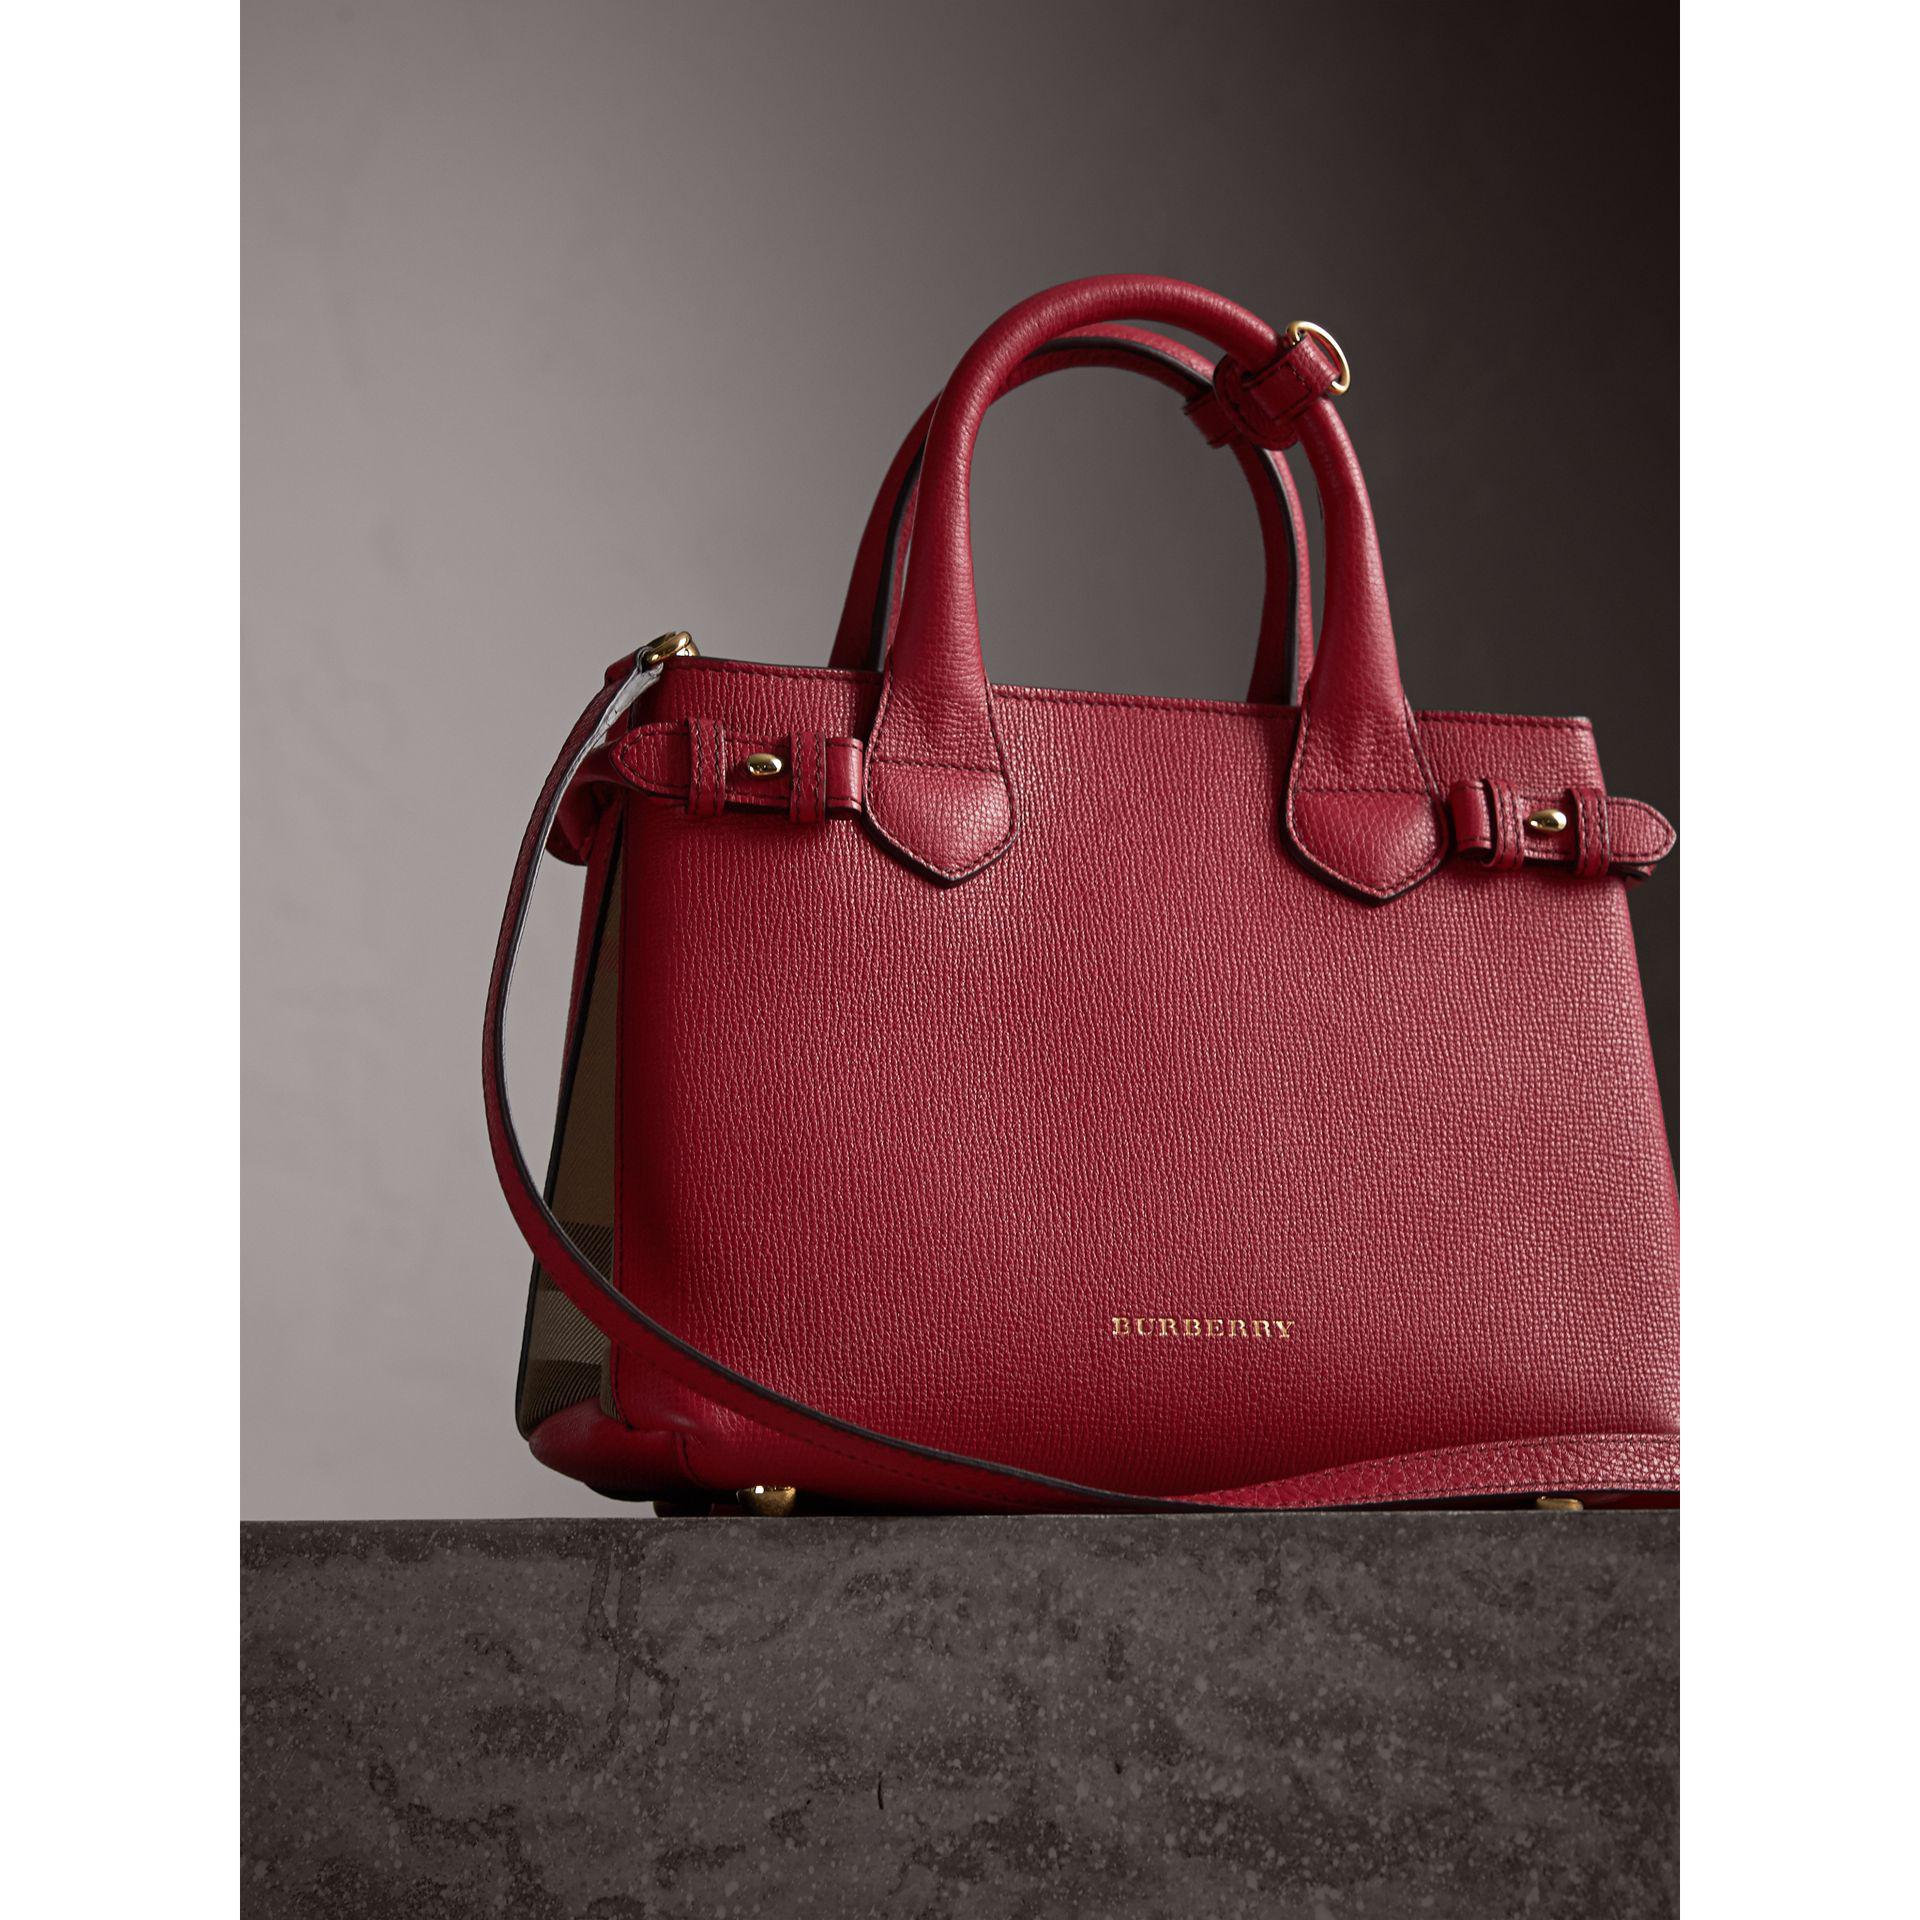 Burberry Small Bridle House Check with Red Leather Trim Document Tote Bag